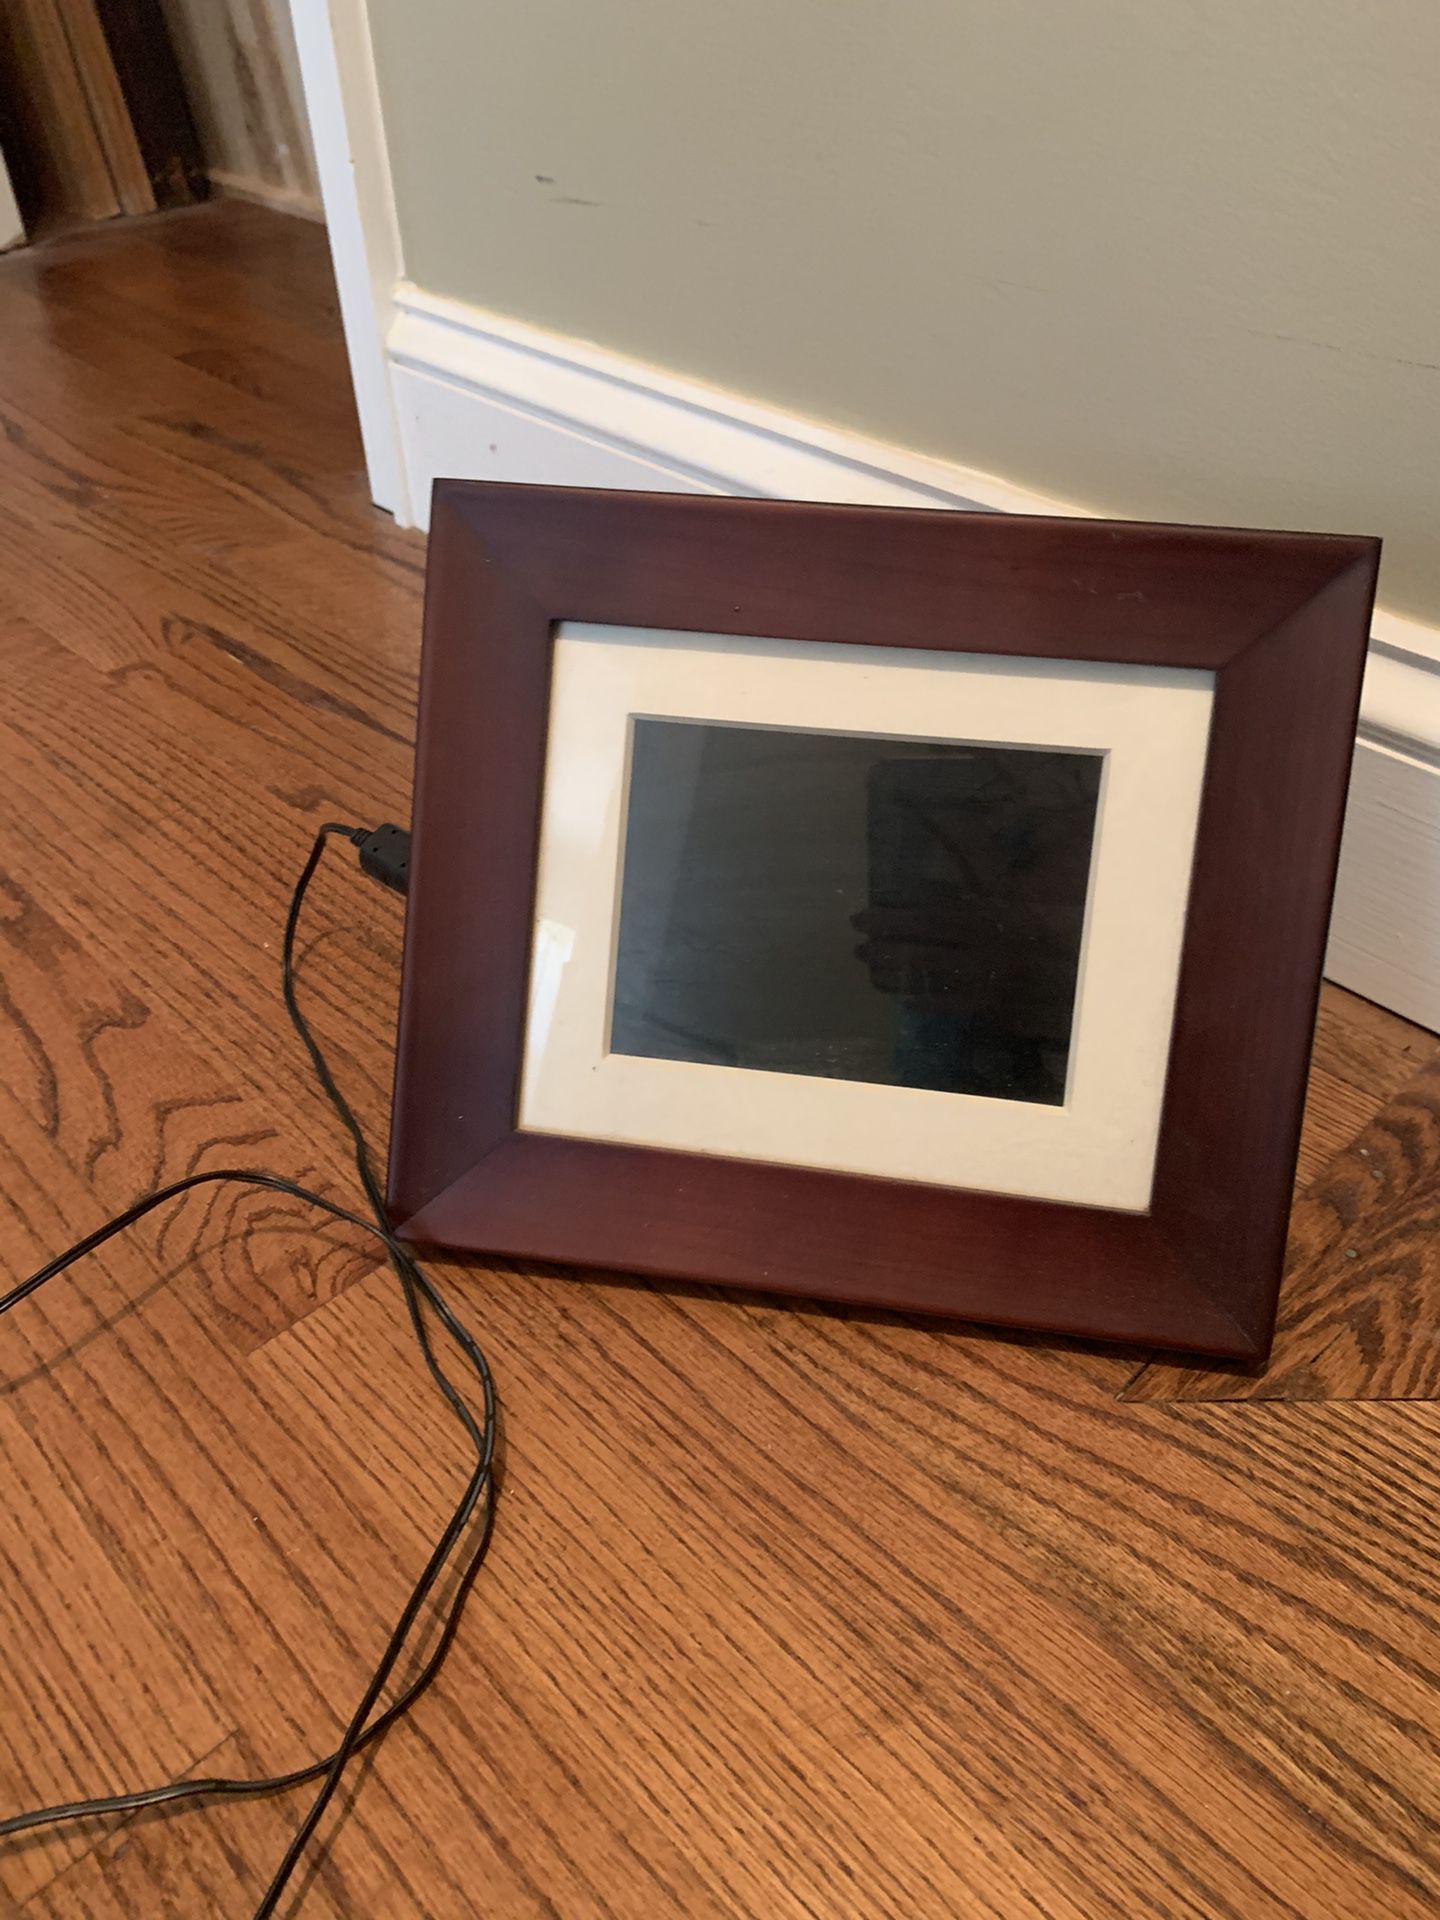 Philips digital picture frame